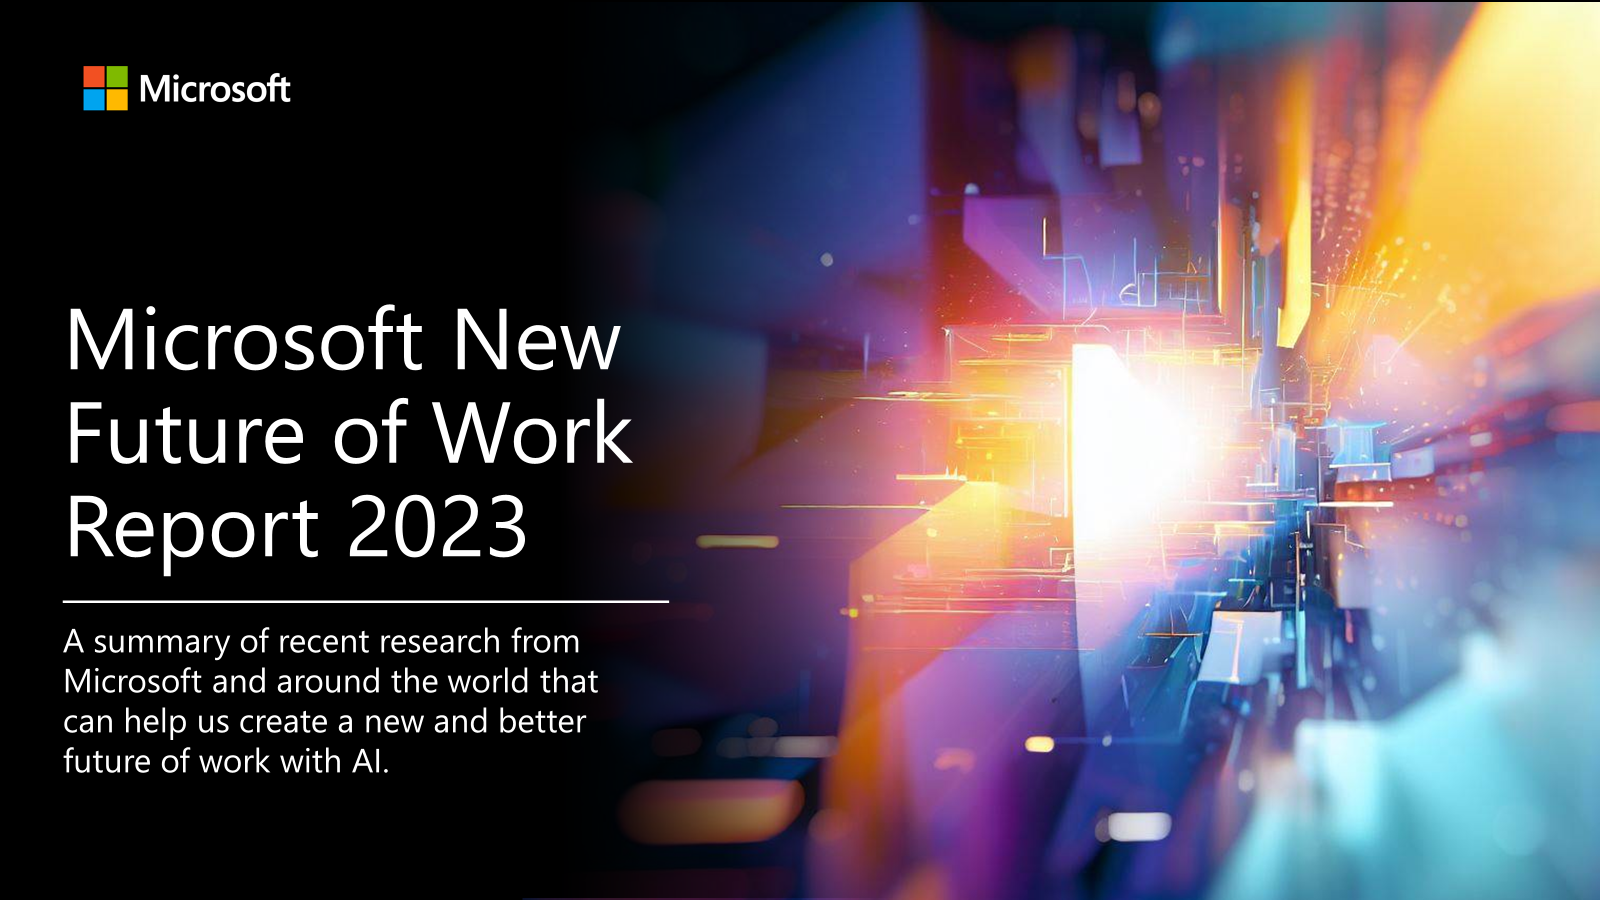 Microsoft New Future of Work Report 2023: A summary of recent research from Microsoft and around the world that can help us create a new and better future of work with AI